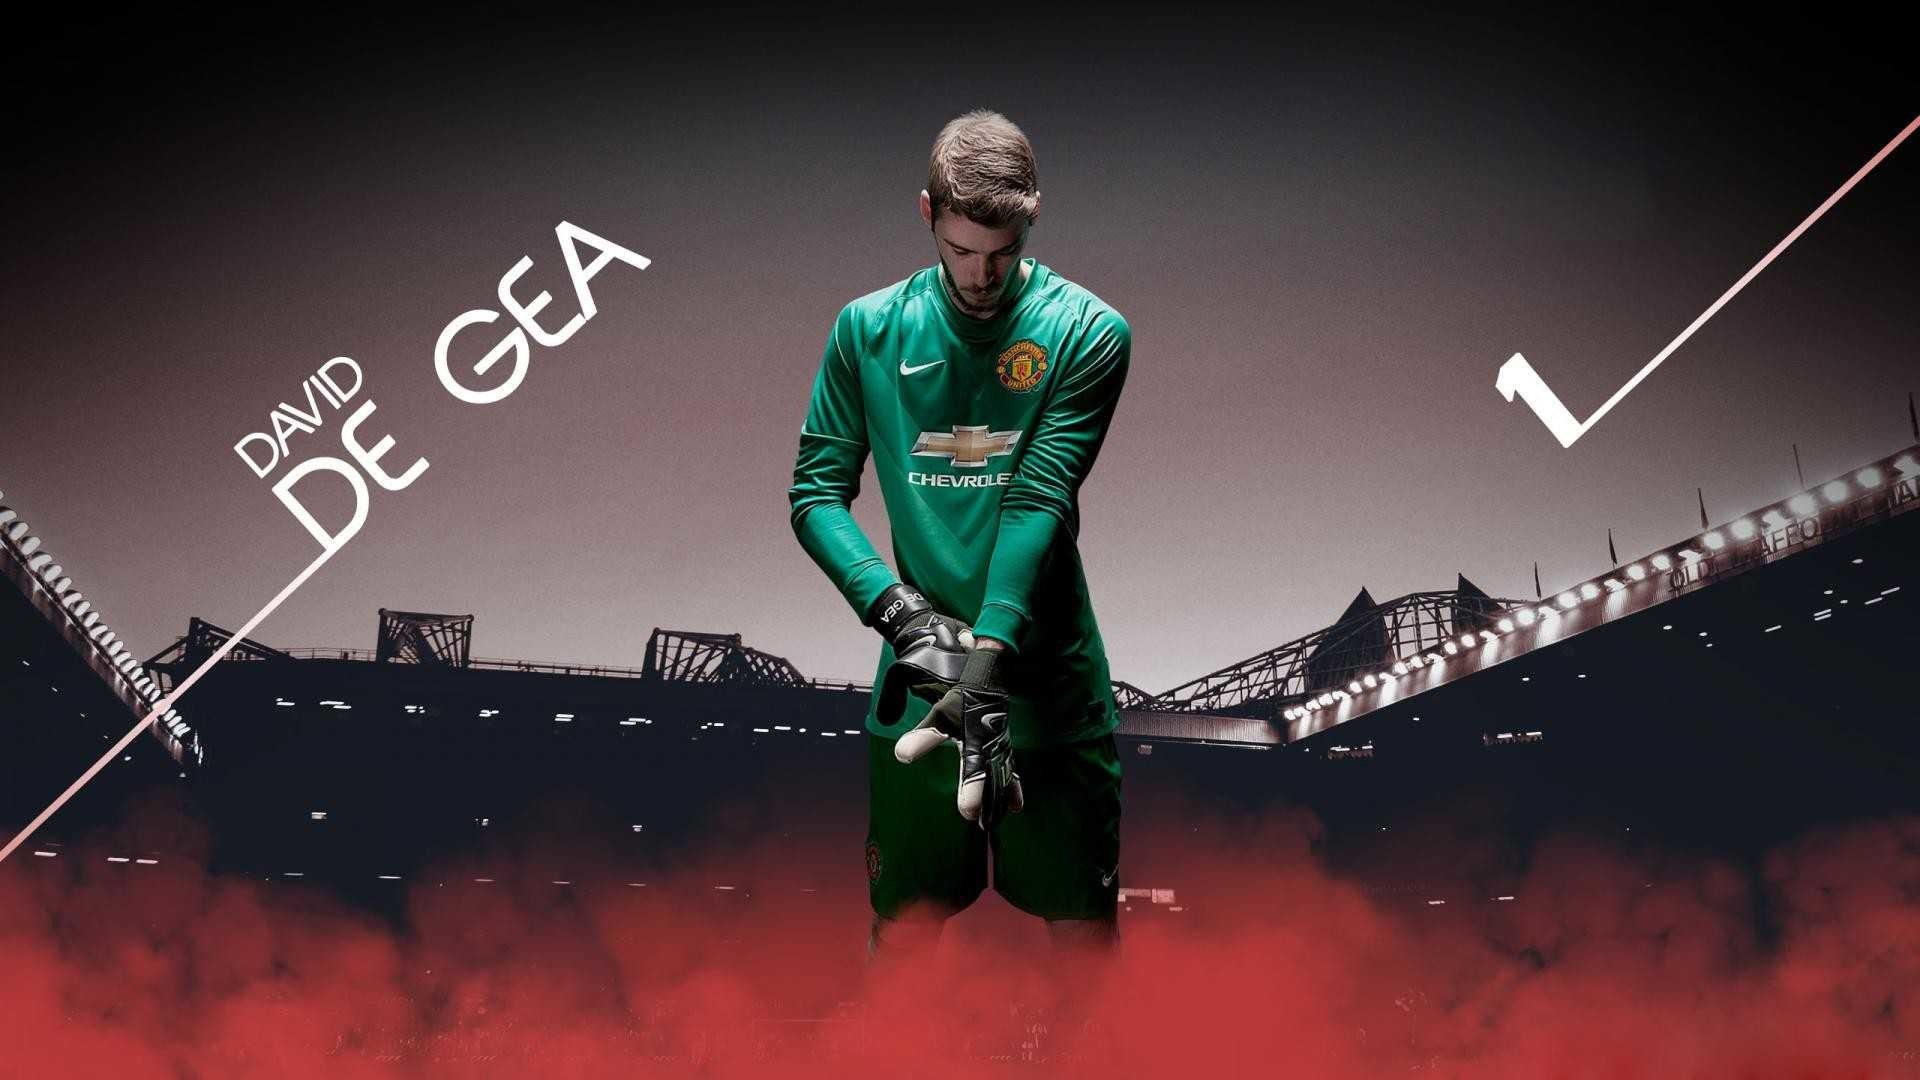 1920x1080 Manchester United Wallpaper Hd 2022 Photos High Resolution Of Mobile Phones 1920x1080